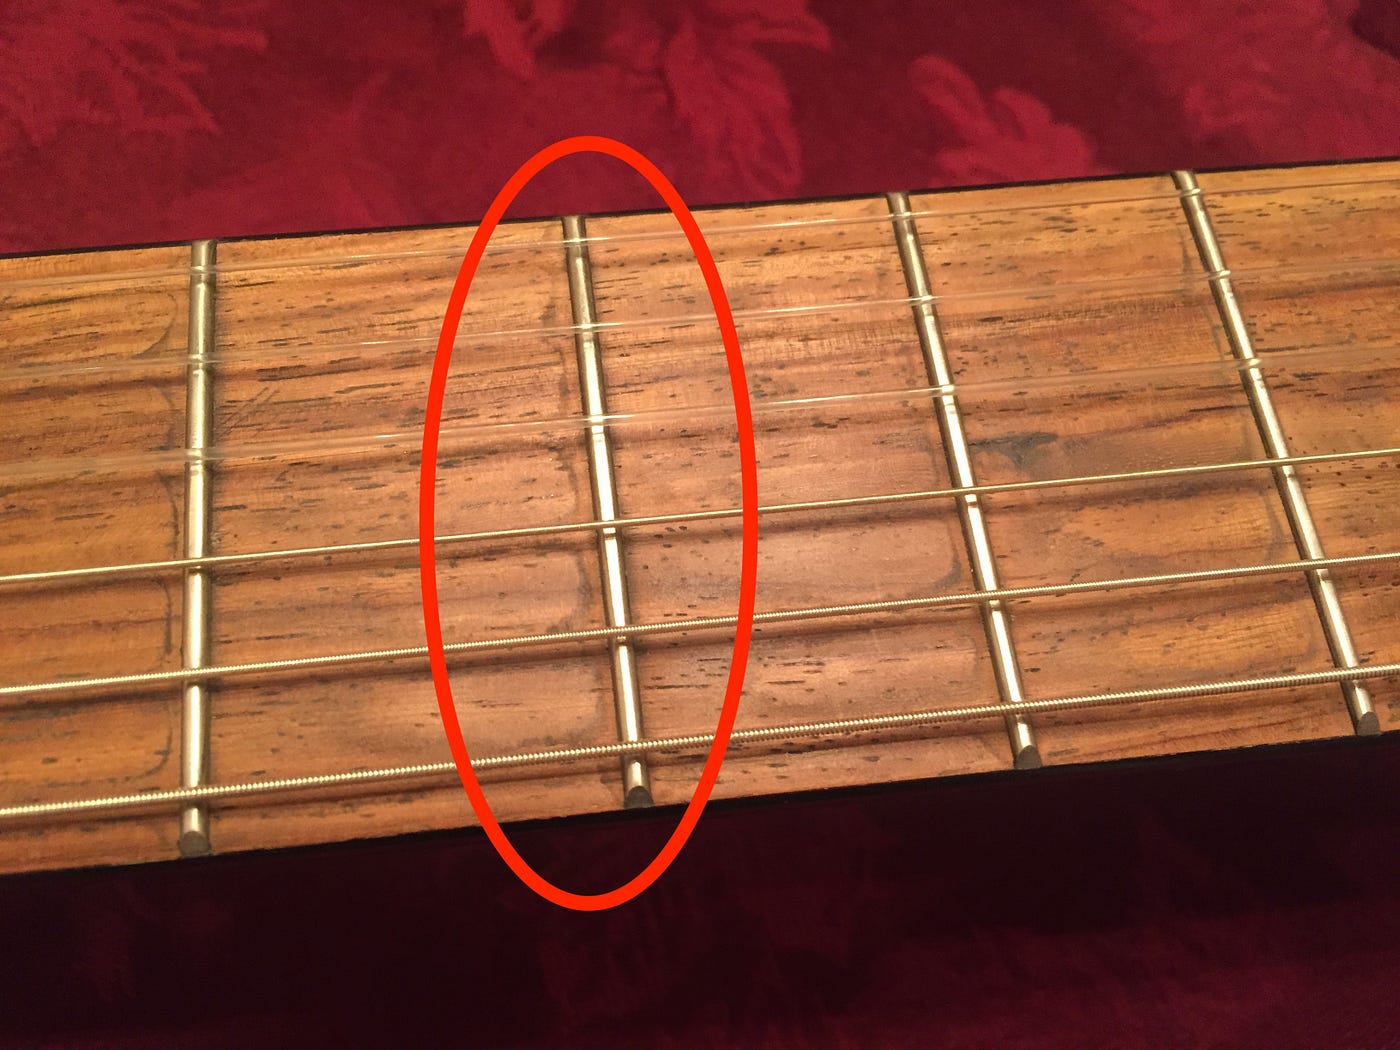 I decided to clean my guitars fretboard (rosewood). I applied some lemon  oil with a microfiber cloth and let it sit overnight. I checked on it in  the morning, and these stains